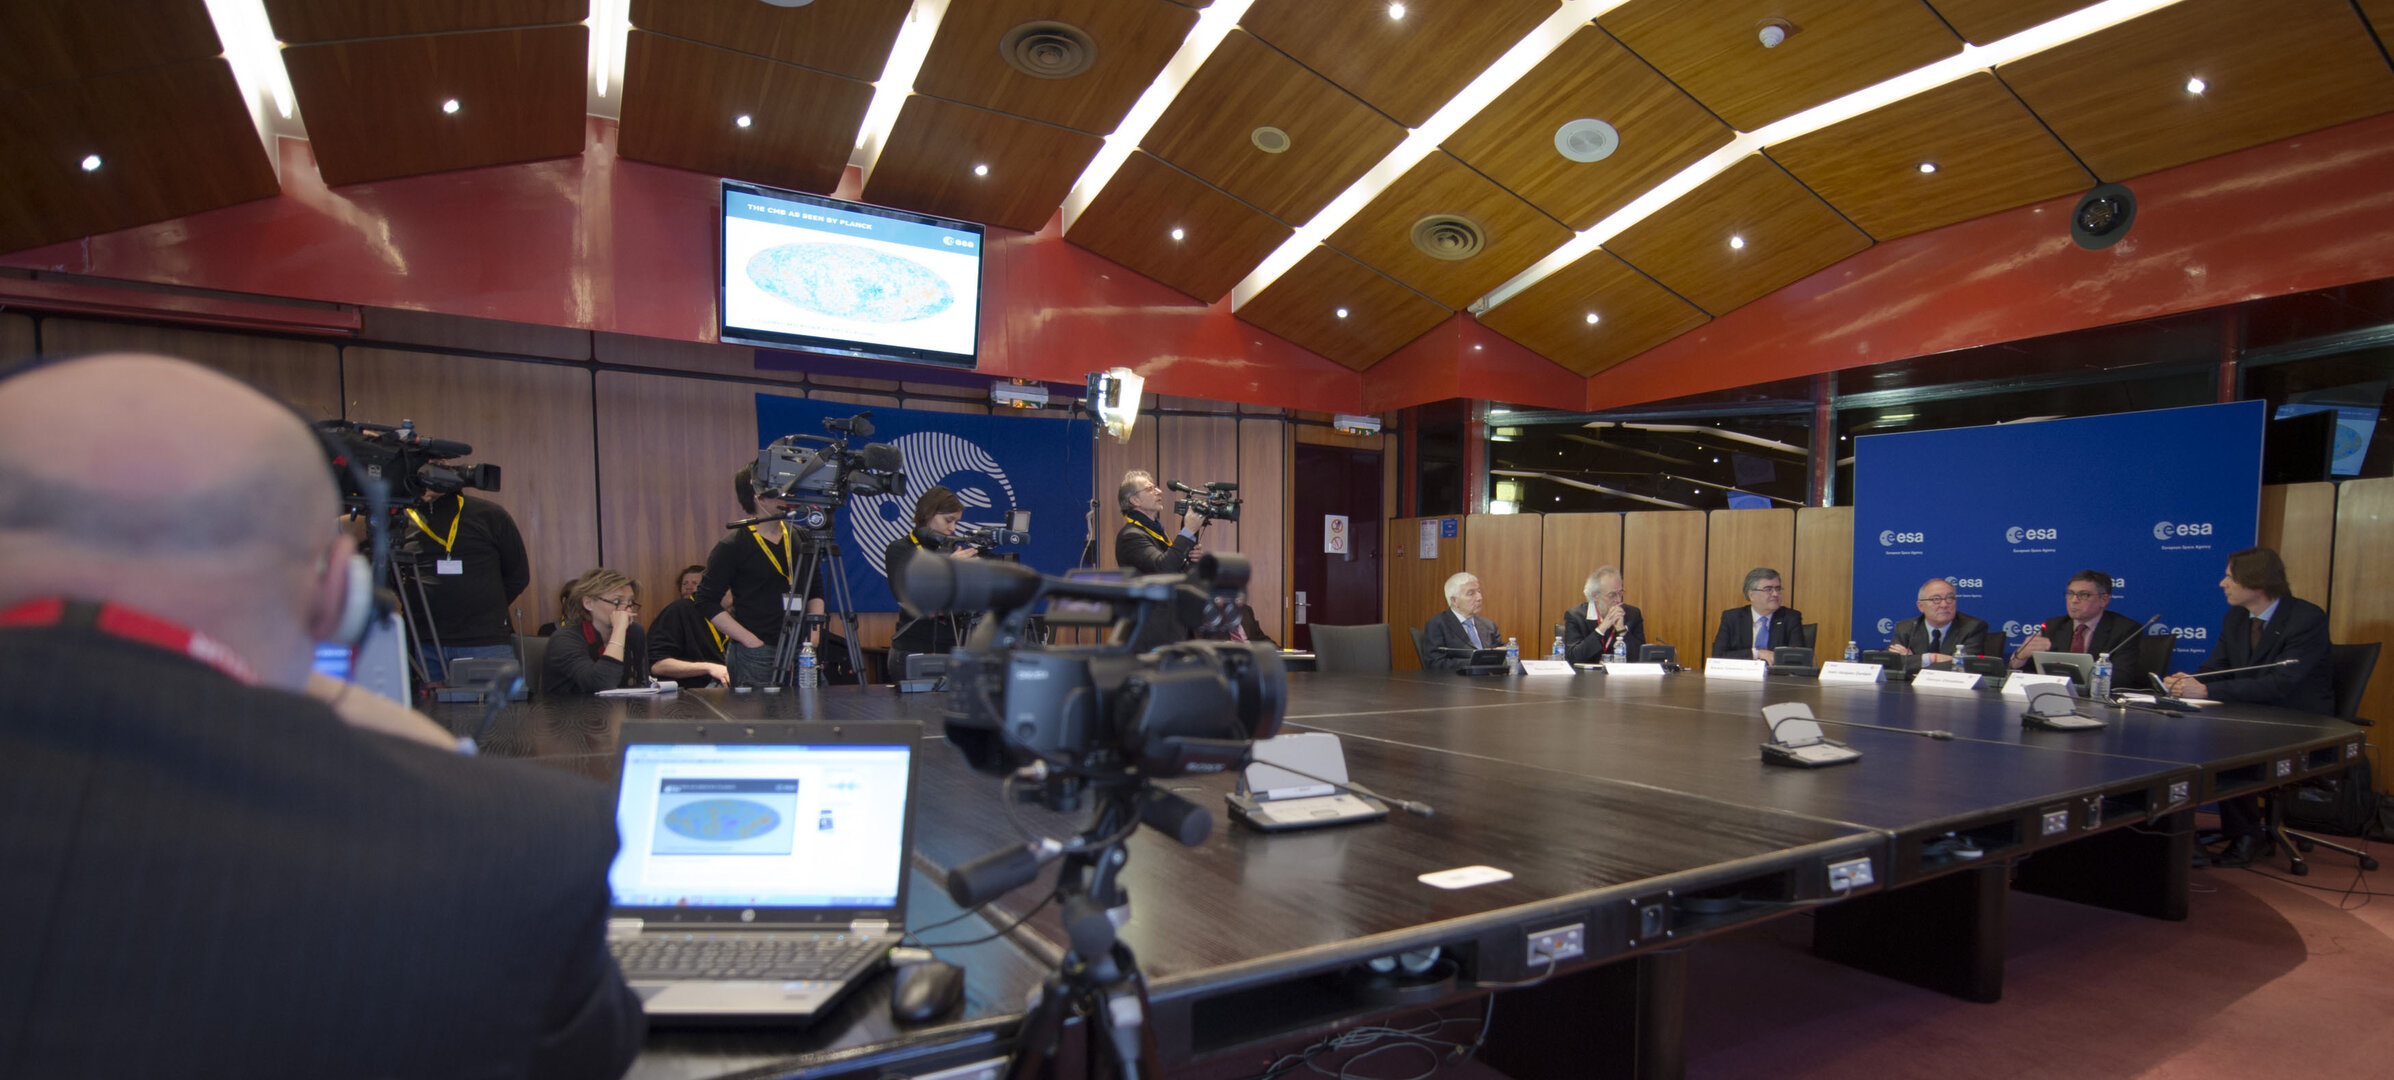 Media briefing on the first cosmology data release from ESA’s Planck mission